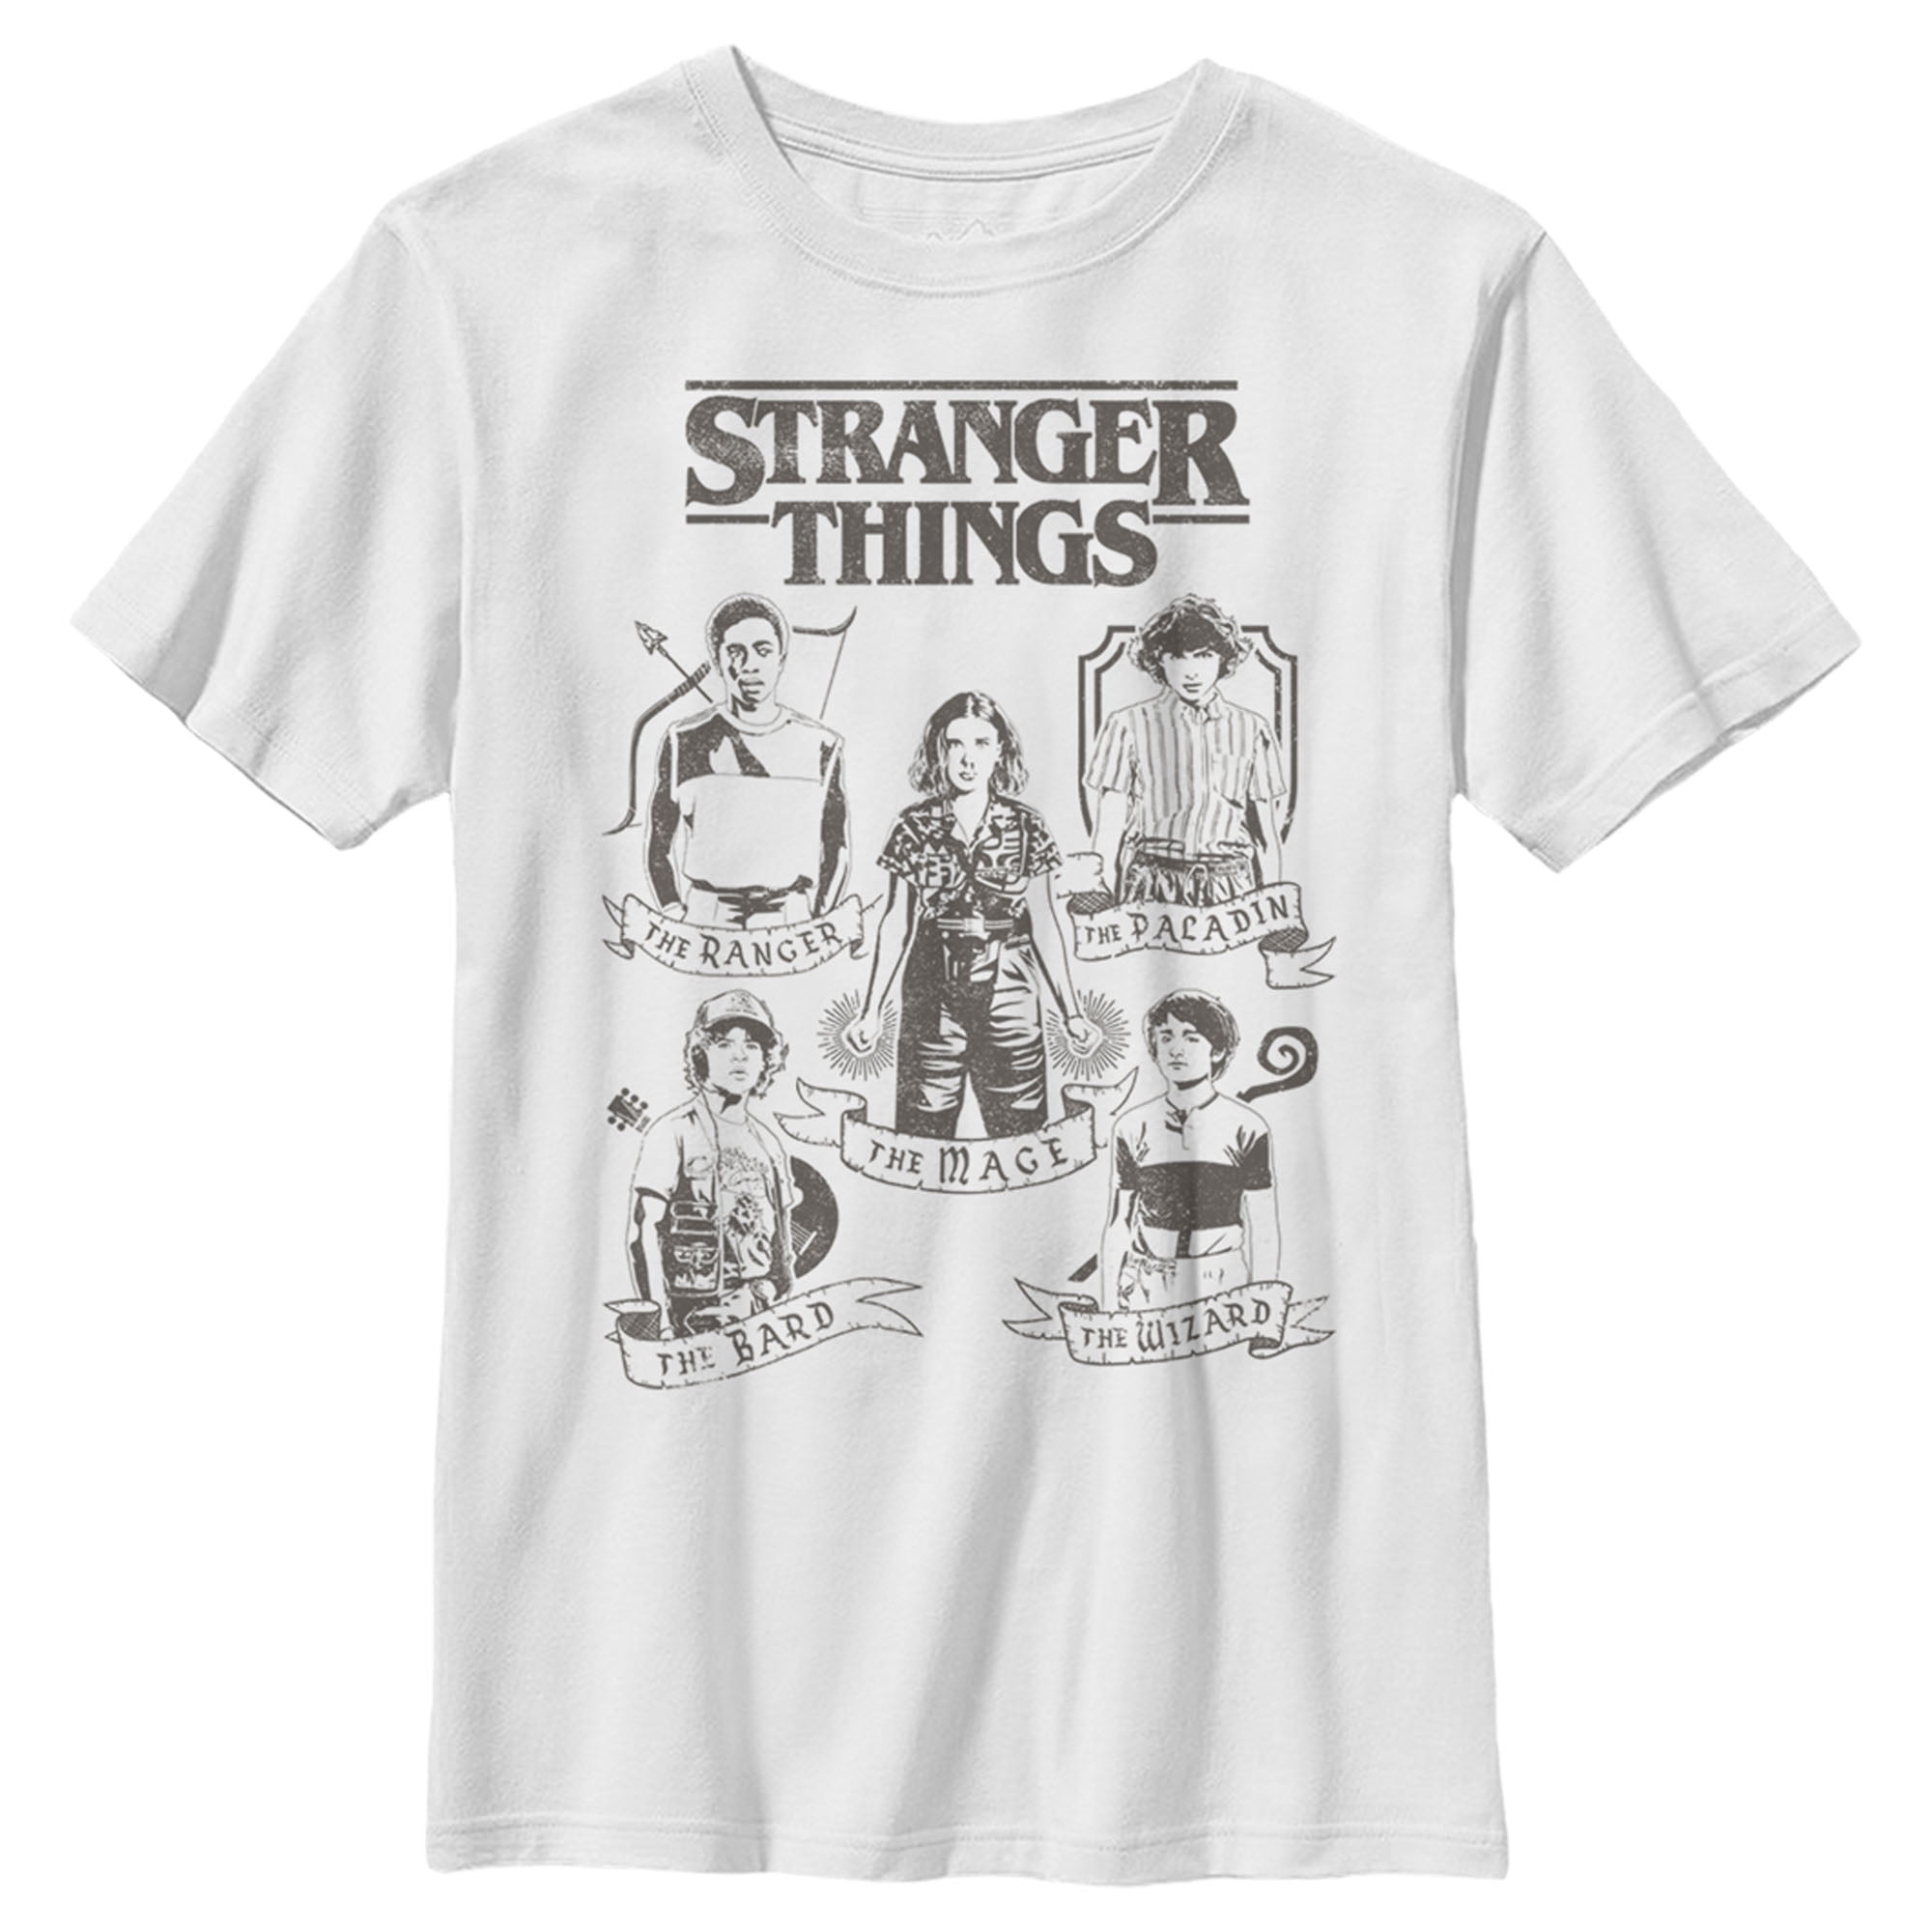 Boy's Stranger Things Group Shot Classes Graphic Tee White Large ...